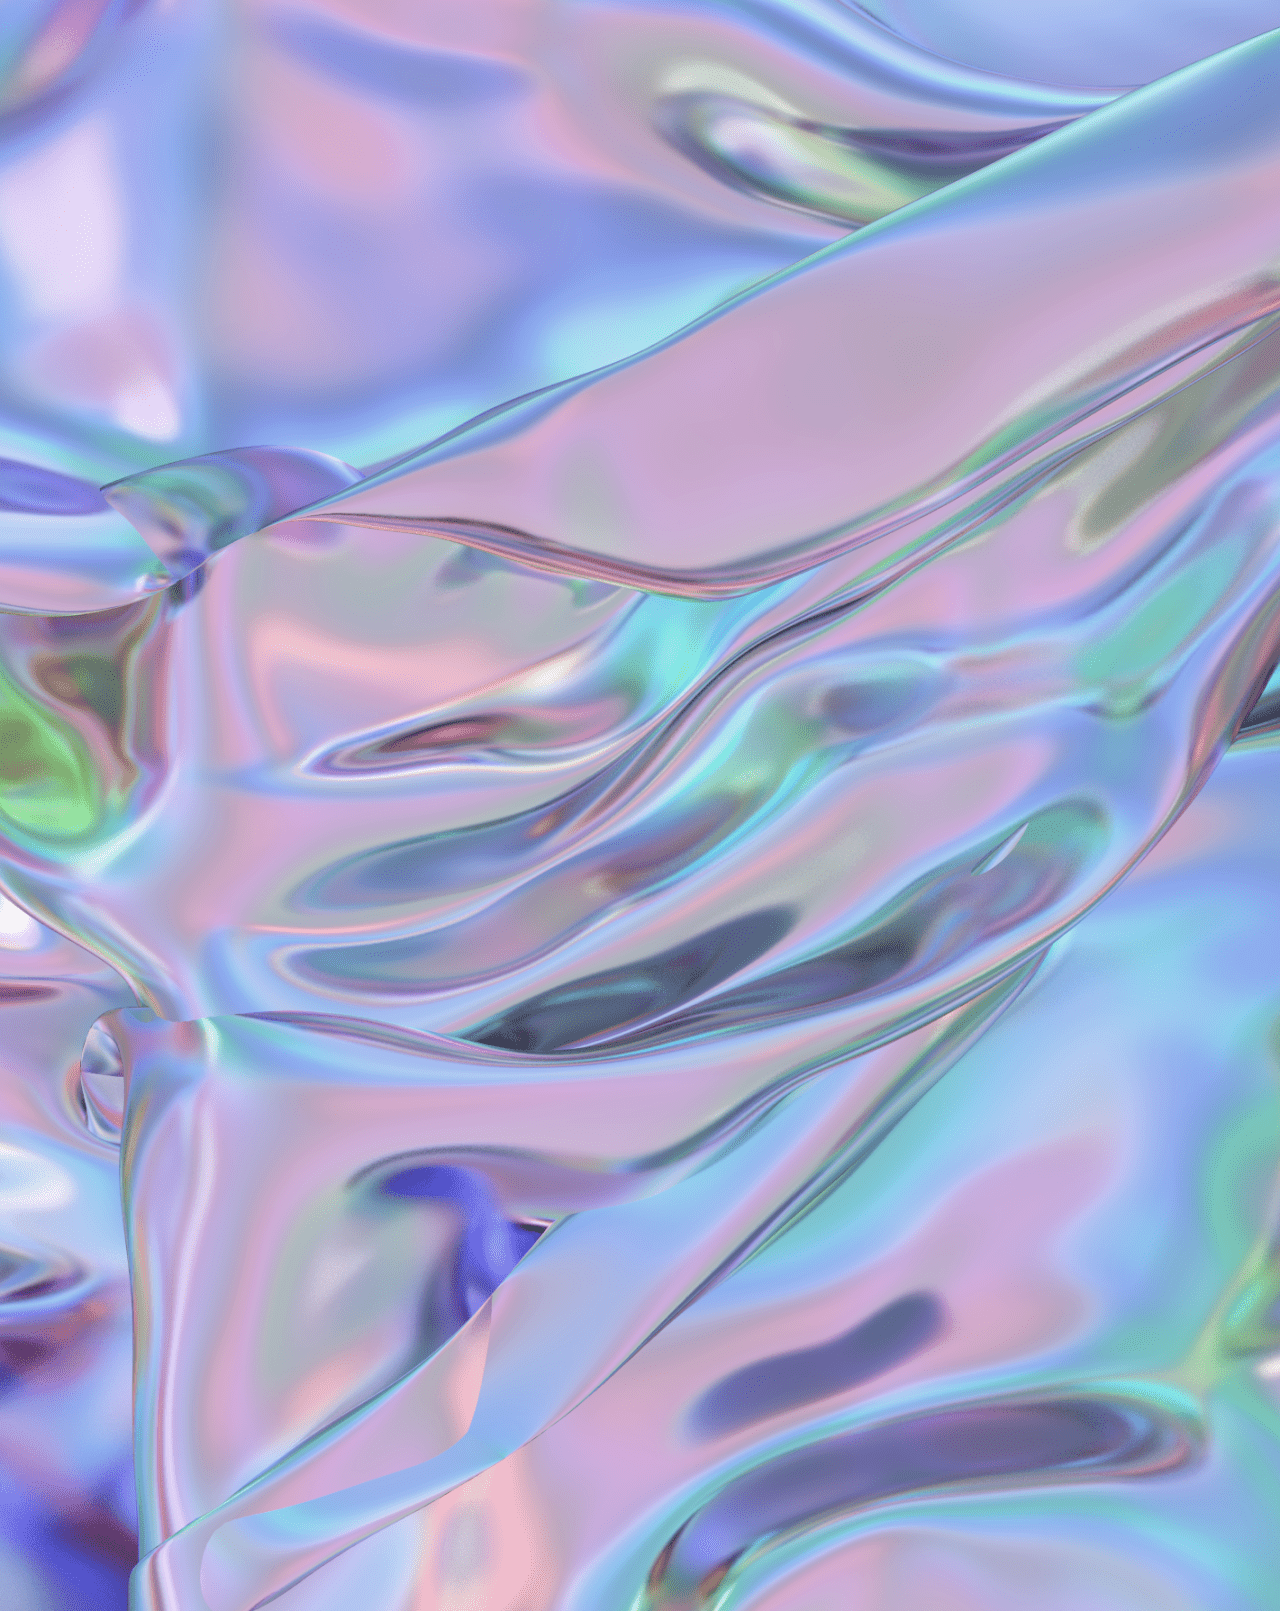 Holographic Mobile Phone Wallpaper